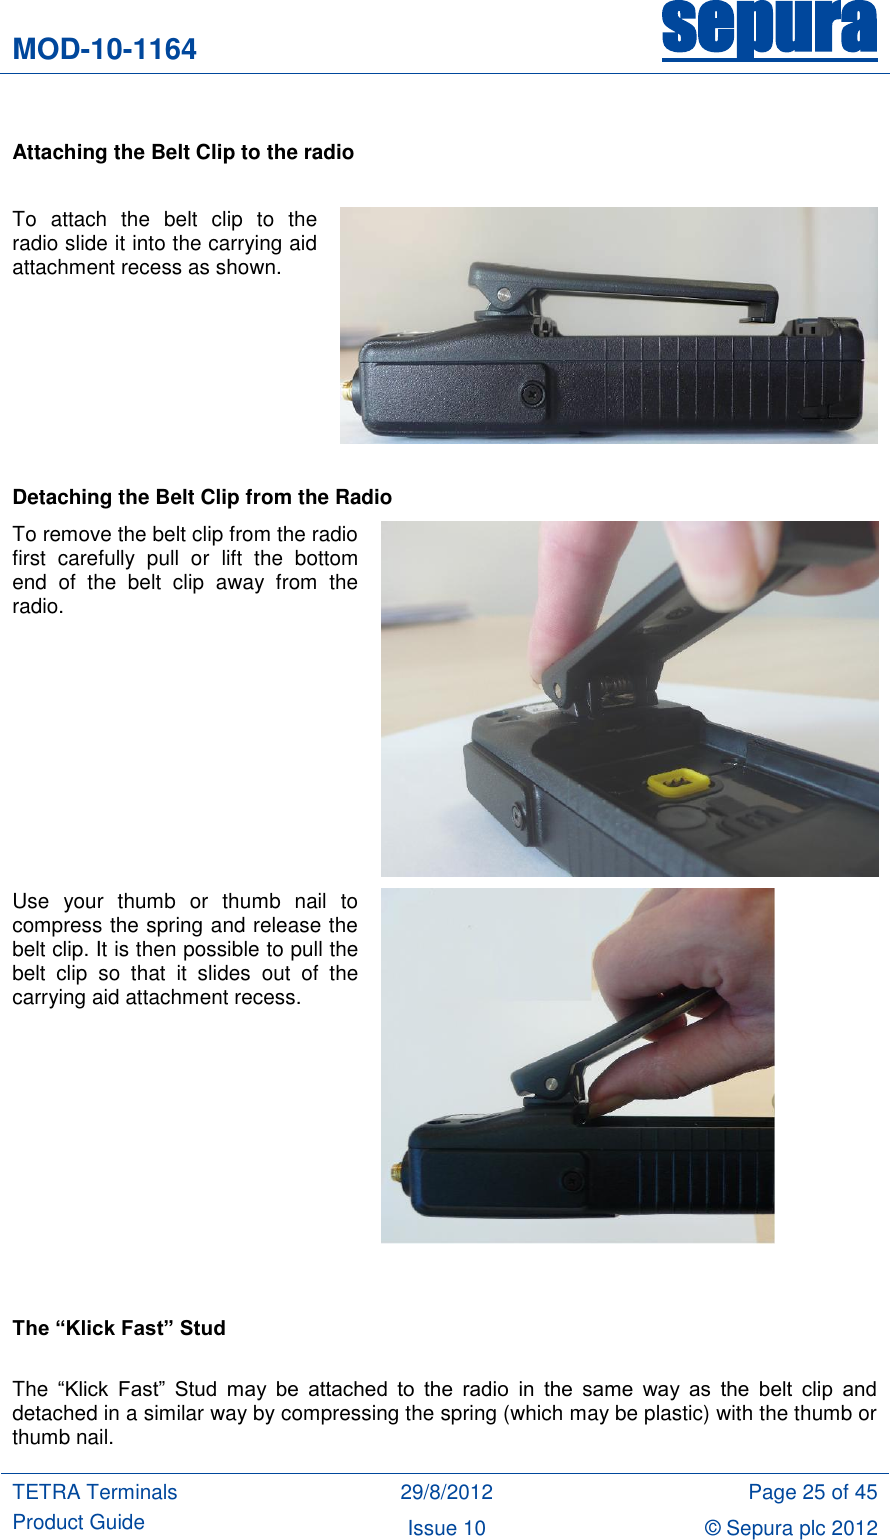 MOD-10-1164 sepura  TETRA Terminals Product Guide 29/8/2012 Page 25 of 45 Issue 10 © Sepura plc 2012    Attaching the Belt Clip to the radio  To  attach  the  belt  clip  to  the radio slide it into the carrying aid attachment recess as shown.    Detaching the Belt Clip from the Radio To remove the belt clip from the radio first  carefully  pull  or  lift  the  bottom end  of  the  belt  clip  away  from  the radio.   Use  your  thumb  or  thumb  nail  to compress the spring and release the belt clip. It is then possible to pull the belt  clip  so  that  it  slides  out  of  the carrying aid attachment recess.      The “Klick Fast” Stud  The  “Klick  Fast”  Stud  may  be  attached  to  the  radio  in  the  same  way  as  the  belt  clip  and detached in a similar way by compressing the spring (which may be plastic) with the thumb or thumb nail.  